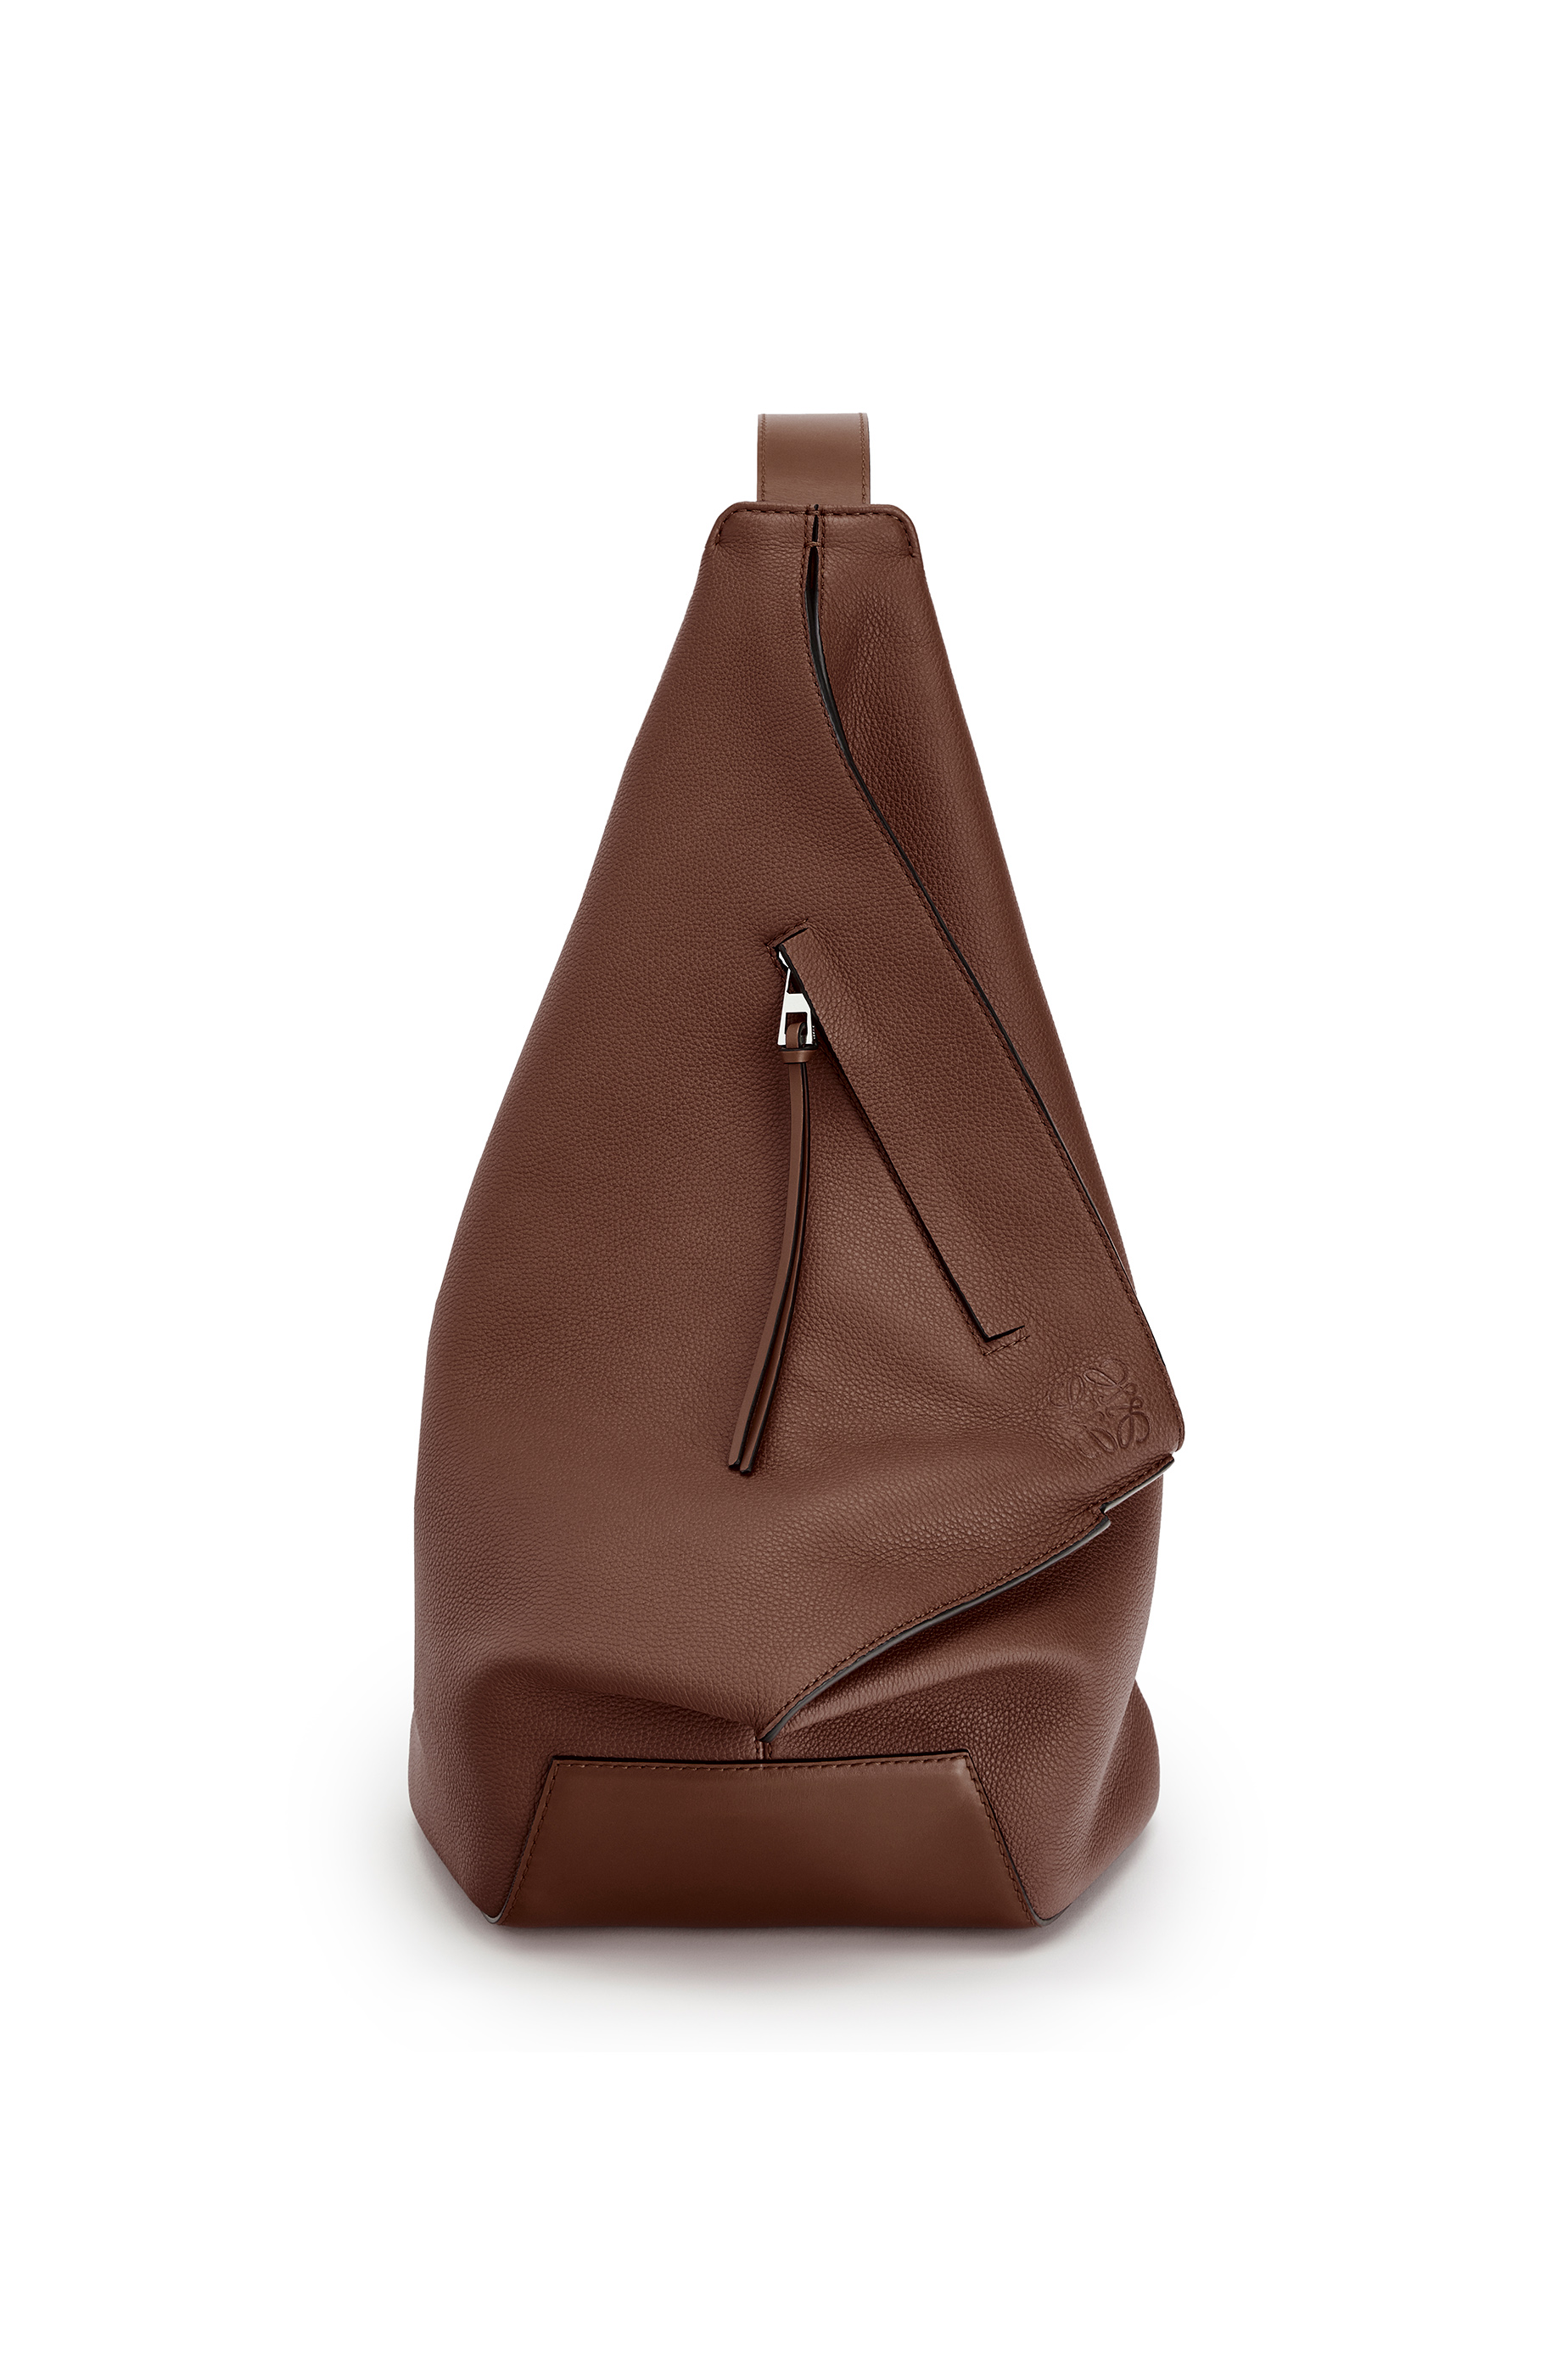 Small Anton backpack in soft grained 